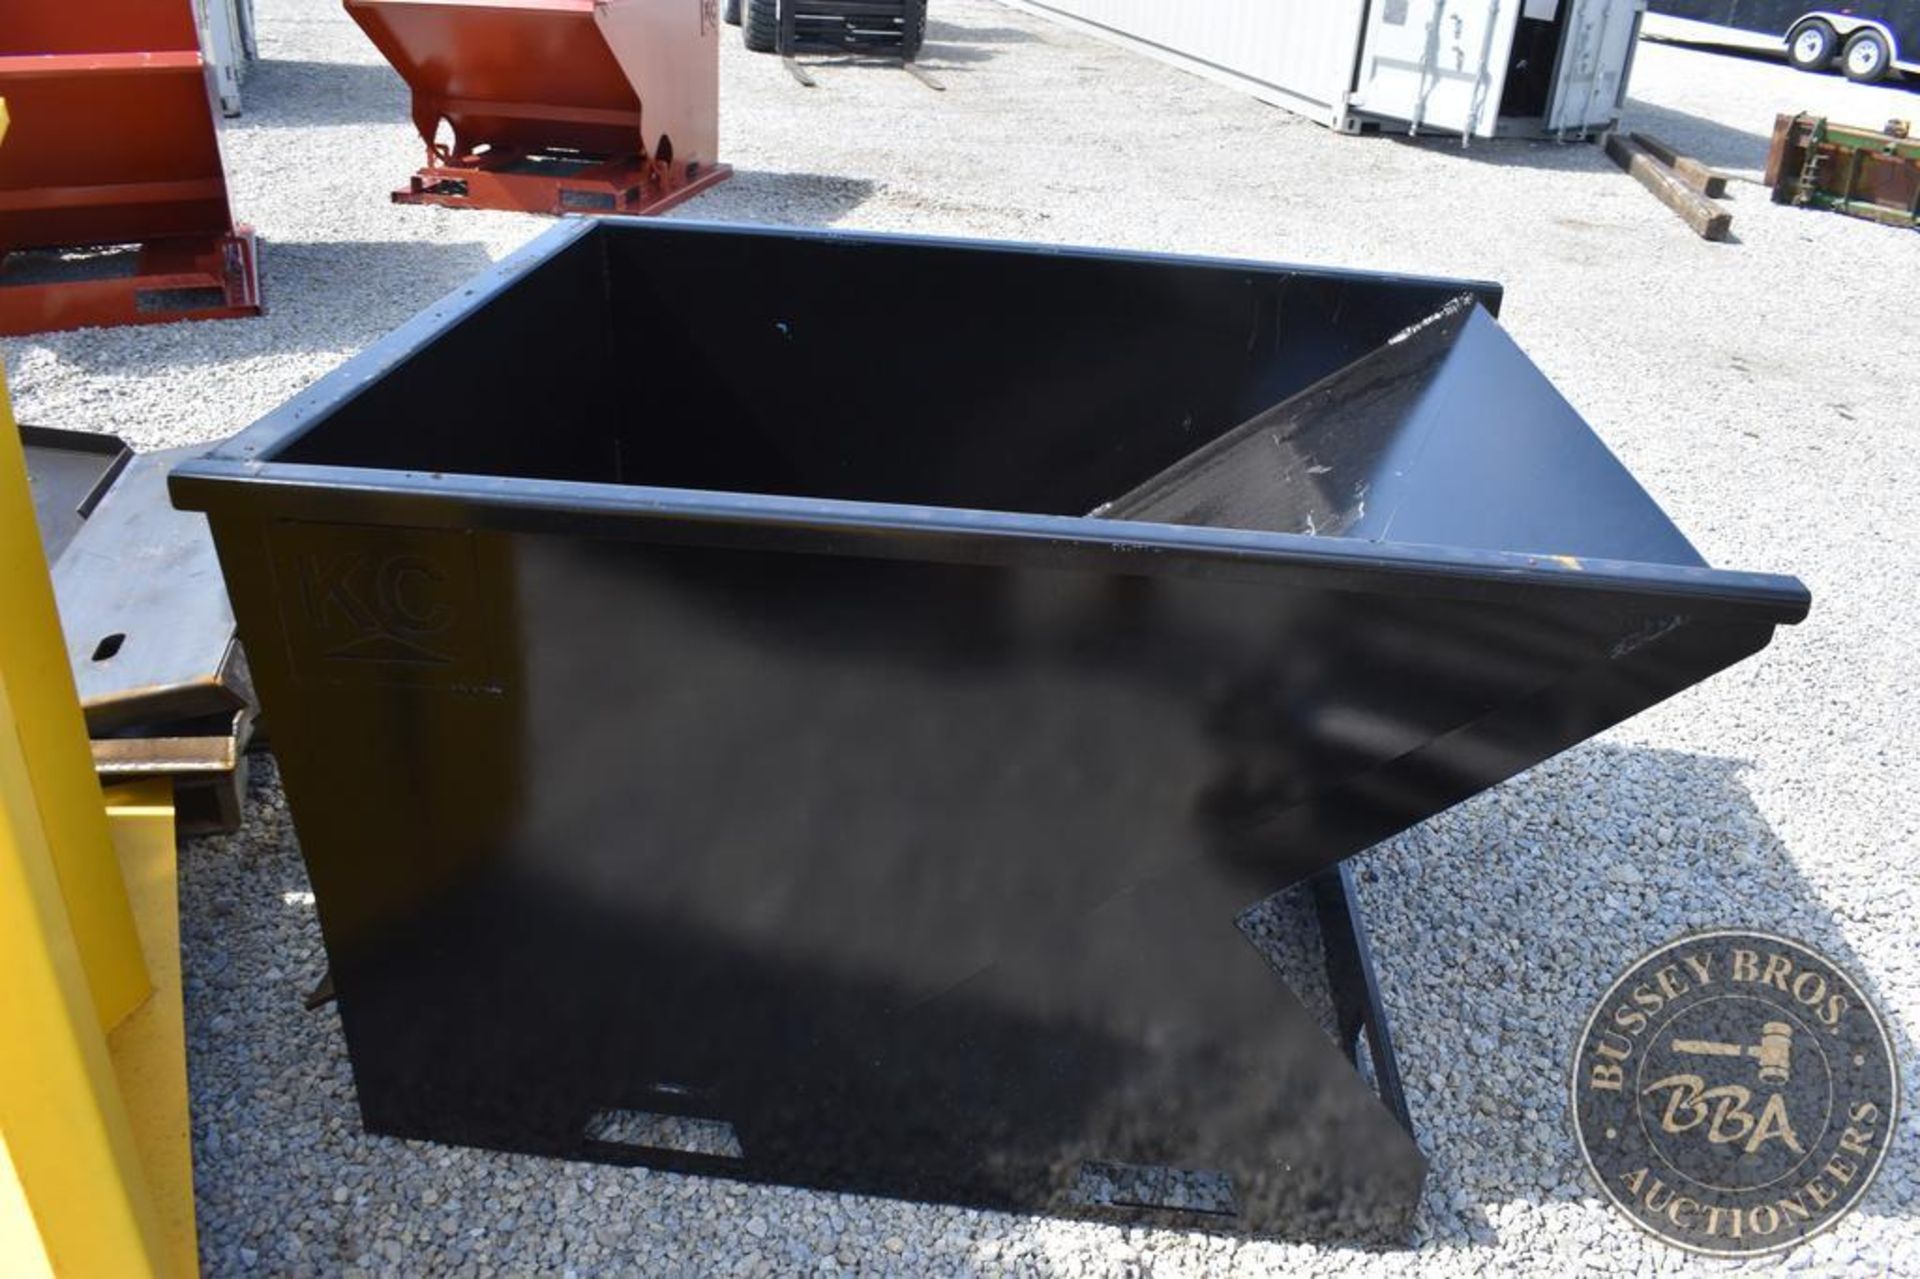 KIT CONTAINERS SKID STEER MOUNT TRASH HOPPER 27306 - Image 3 of 5